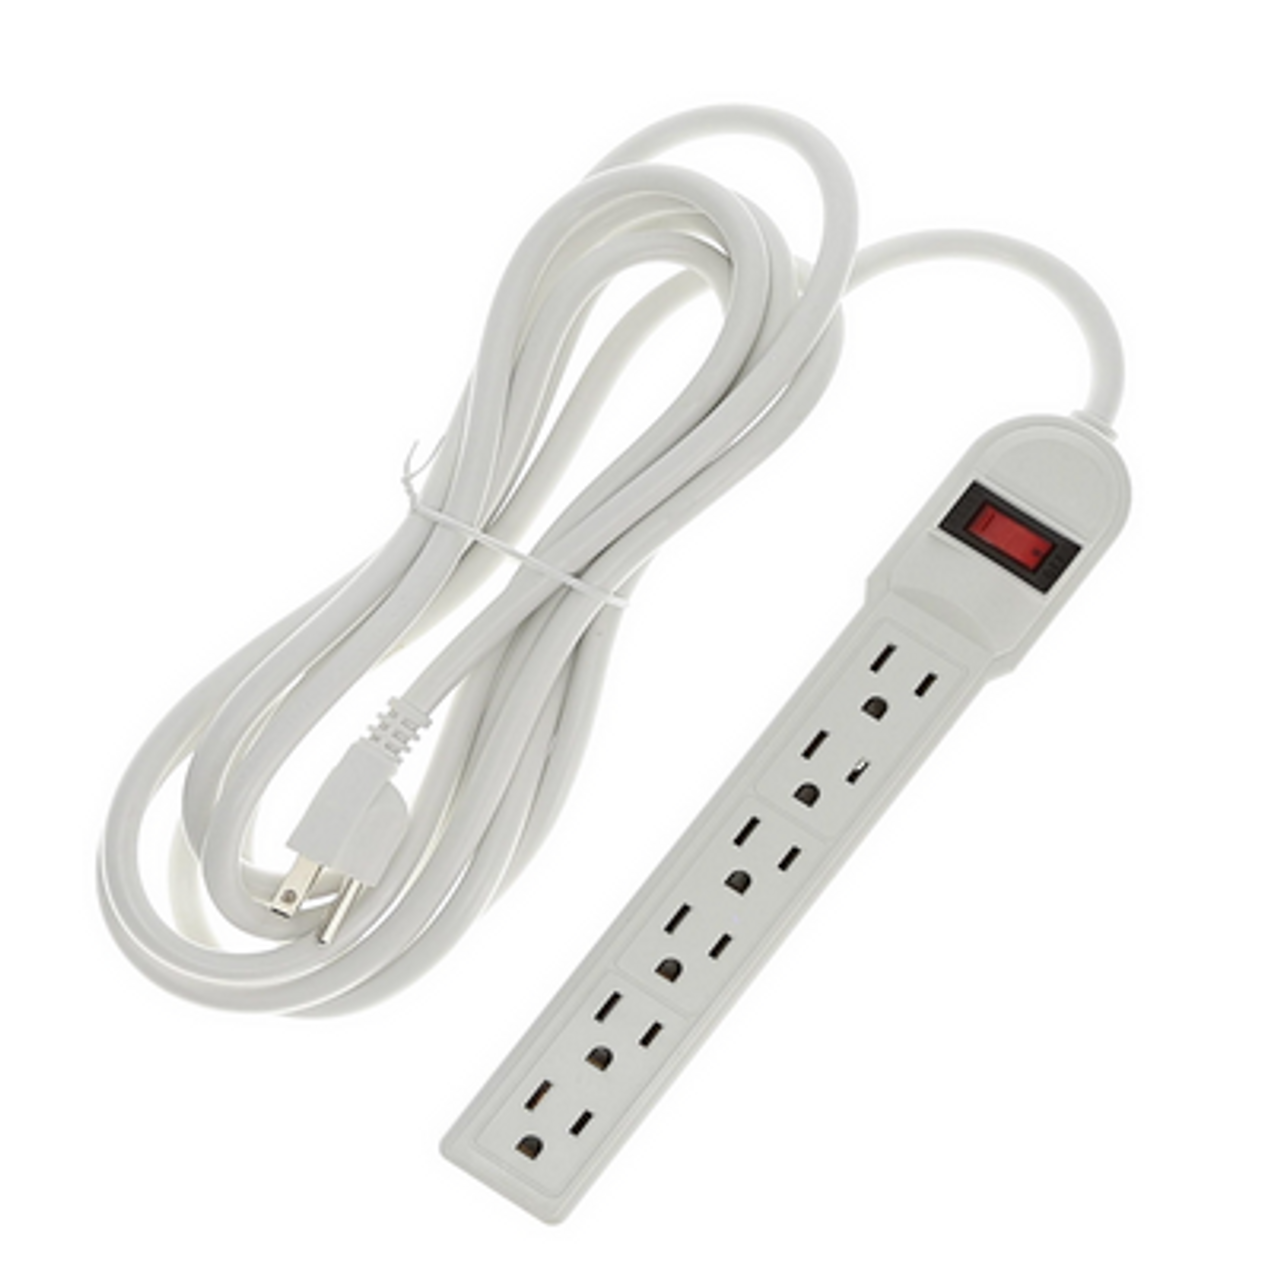 6 Outlet Plastic Surge Protector Power Strip with 12 ft. Cord